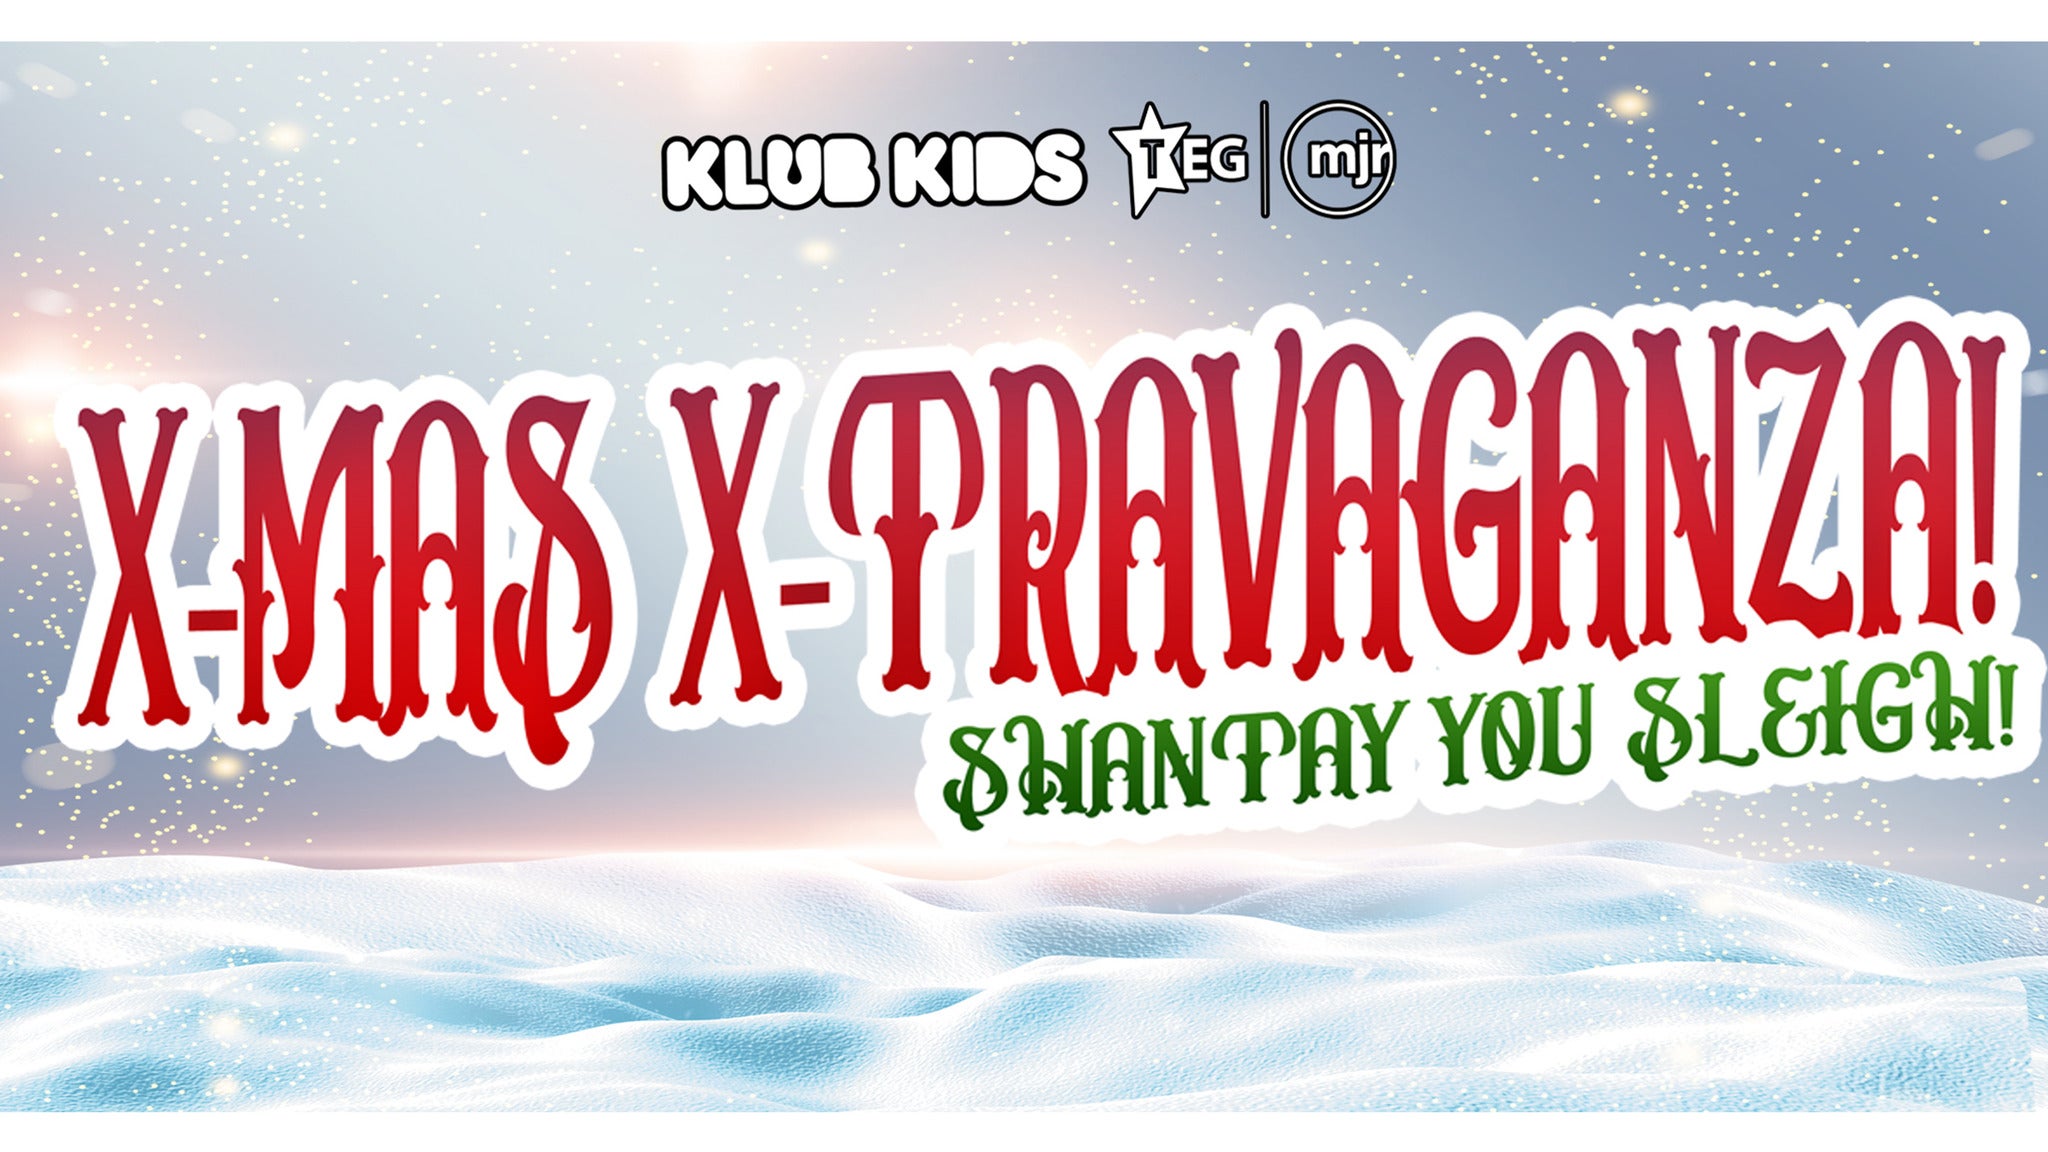 The Xmas Xtravaganza: Shantay You Sleigh Event Title Pic